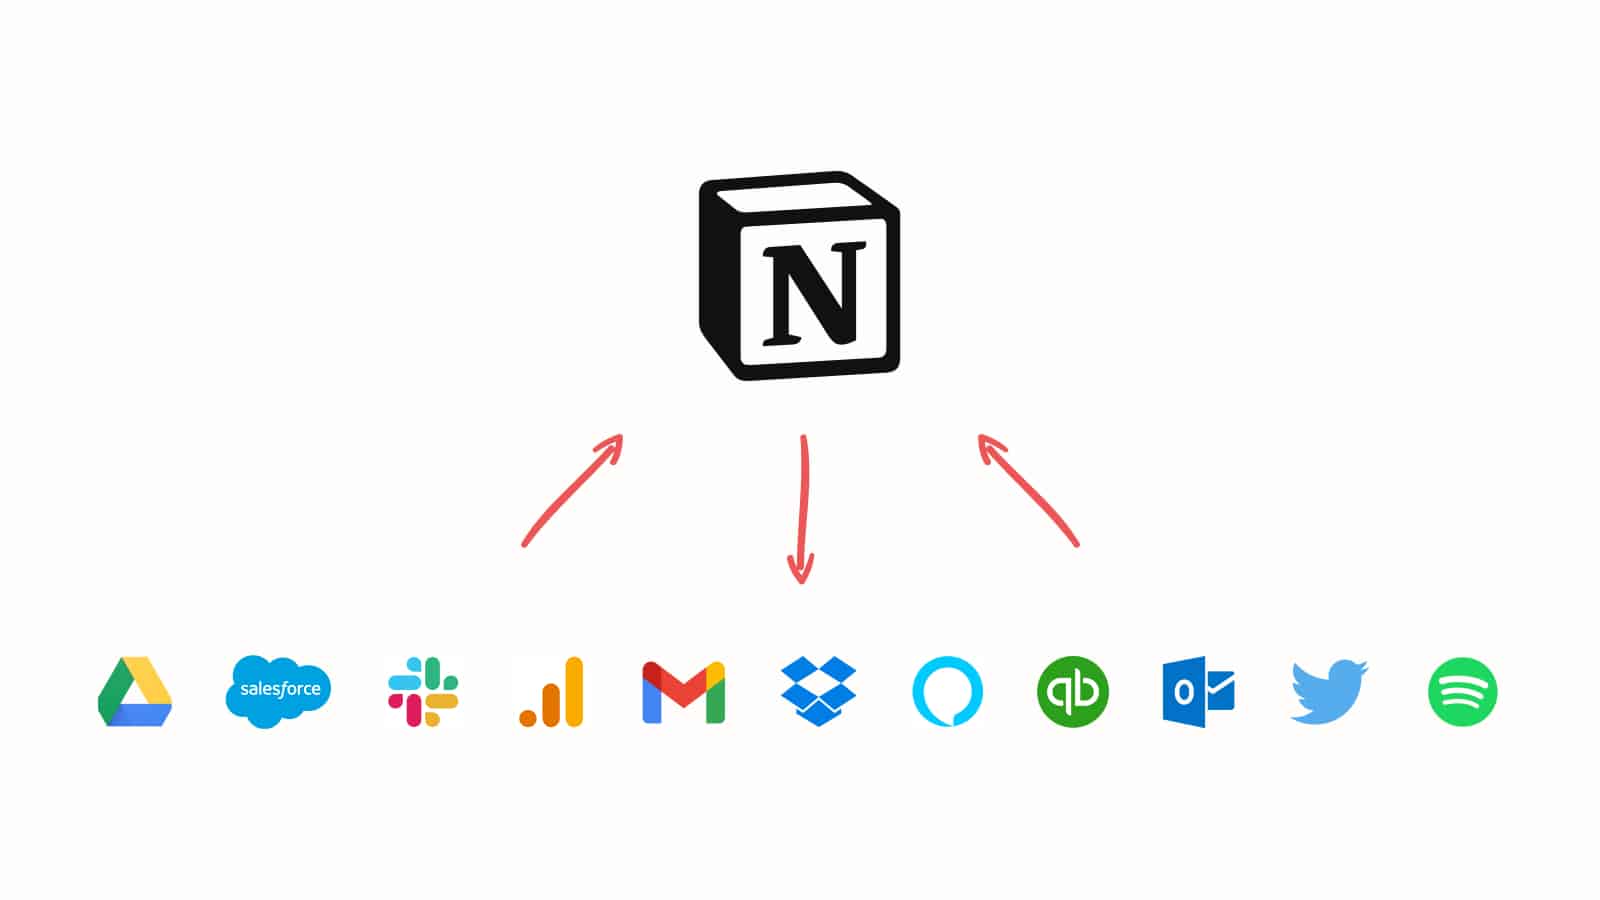 Notion VIP: Notion Explained: The API Debut